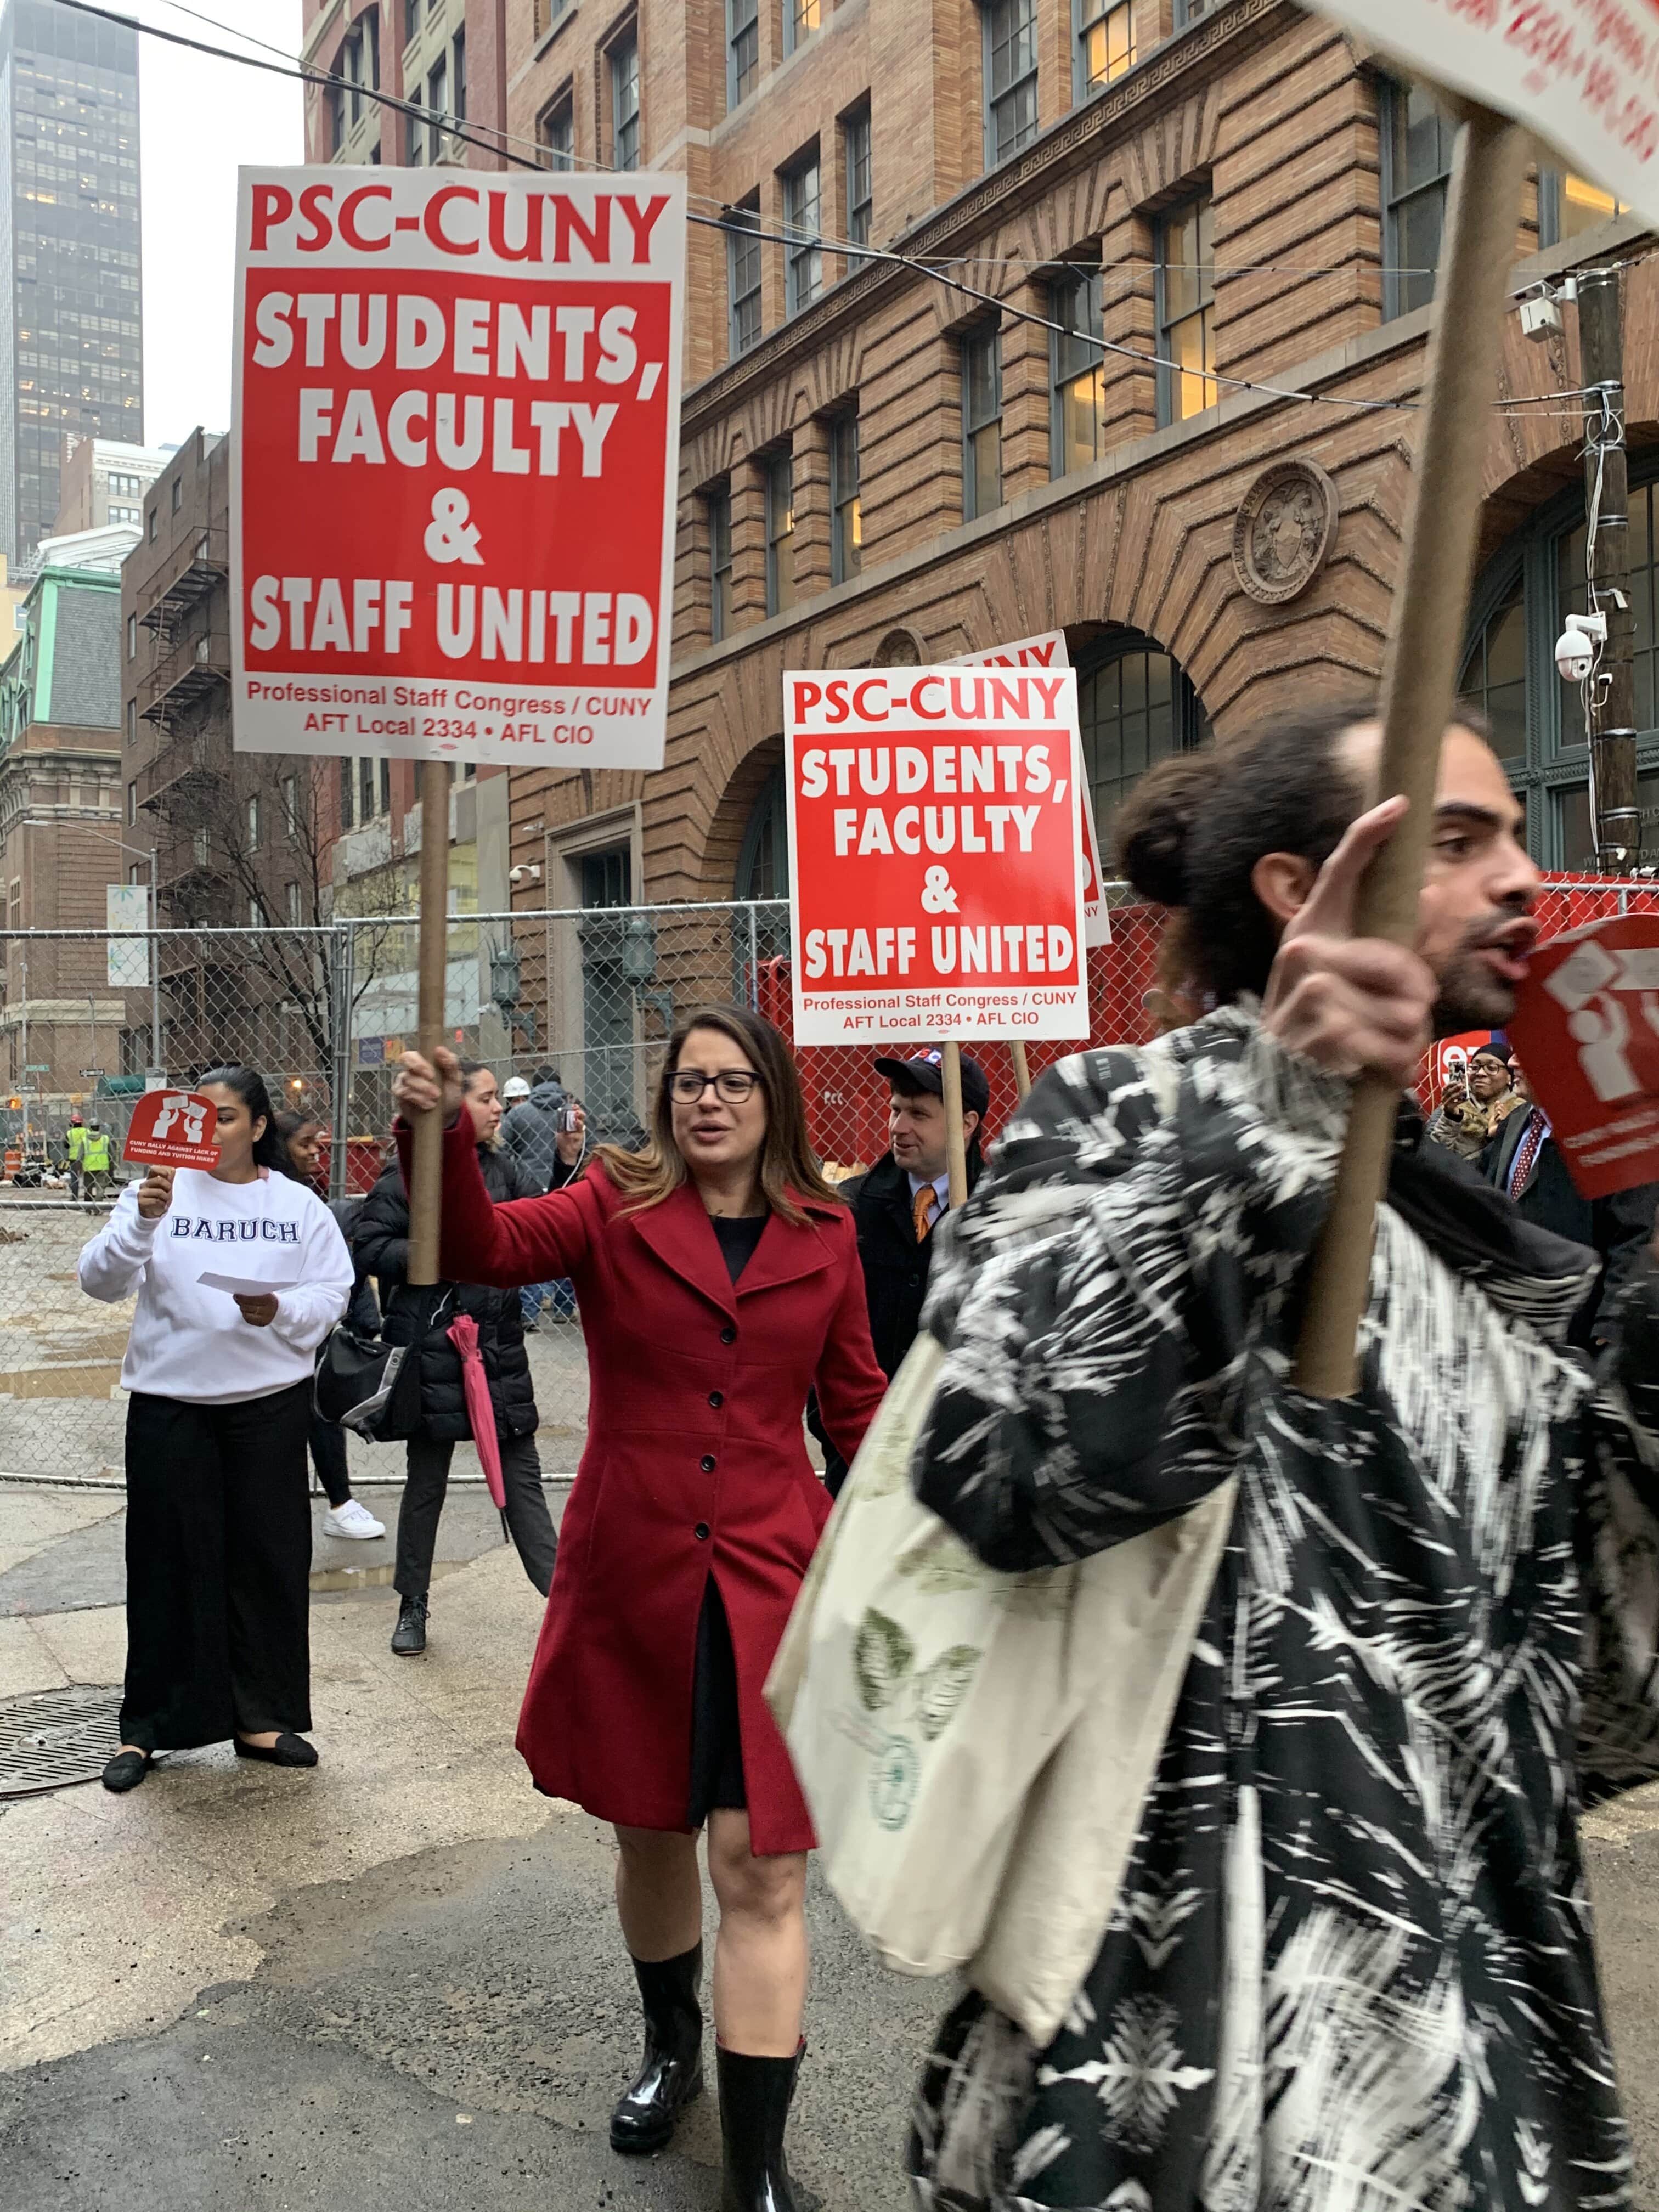 Standing in solidarity with Professional Staff Congress/CUNY.